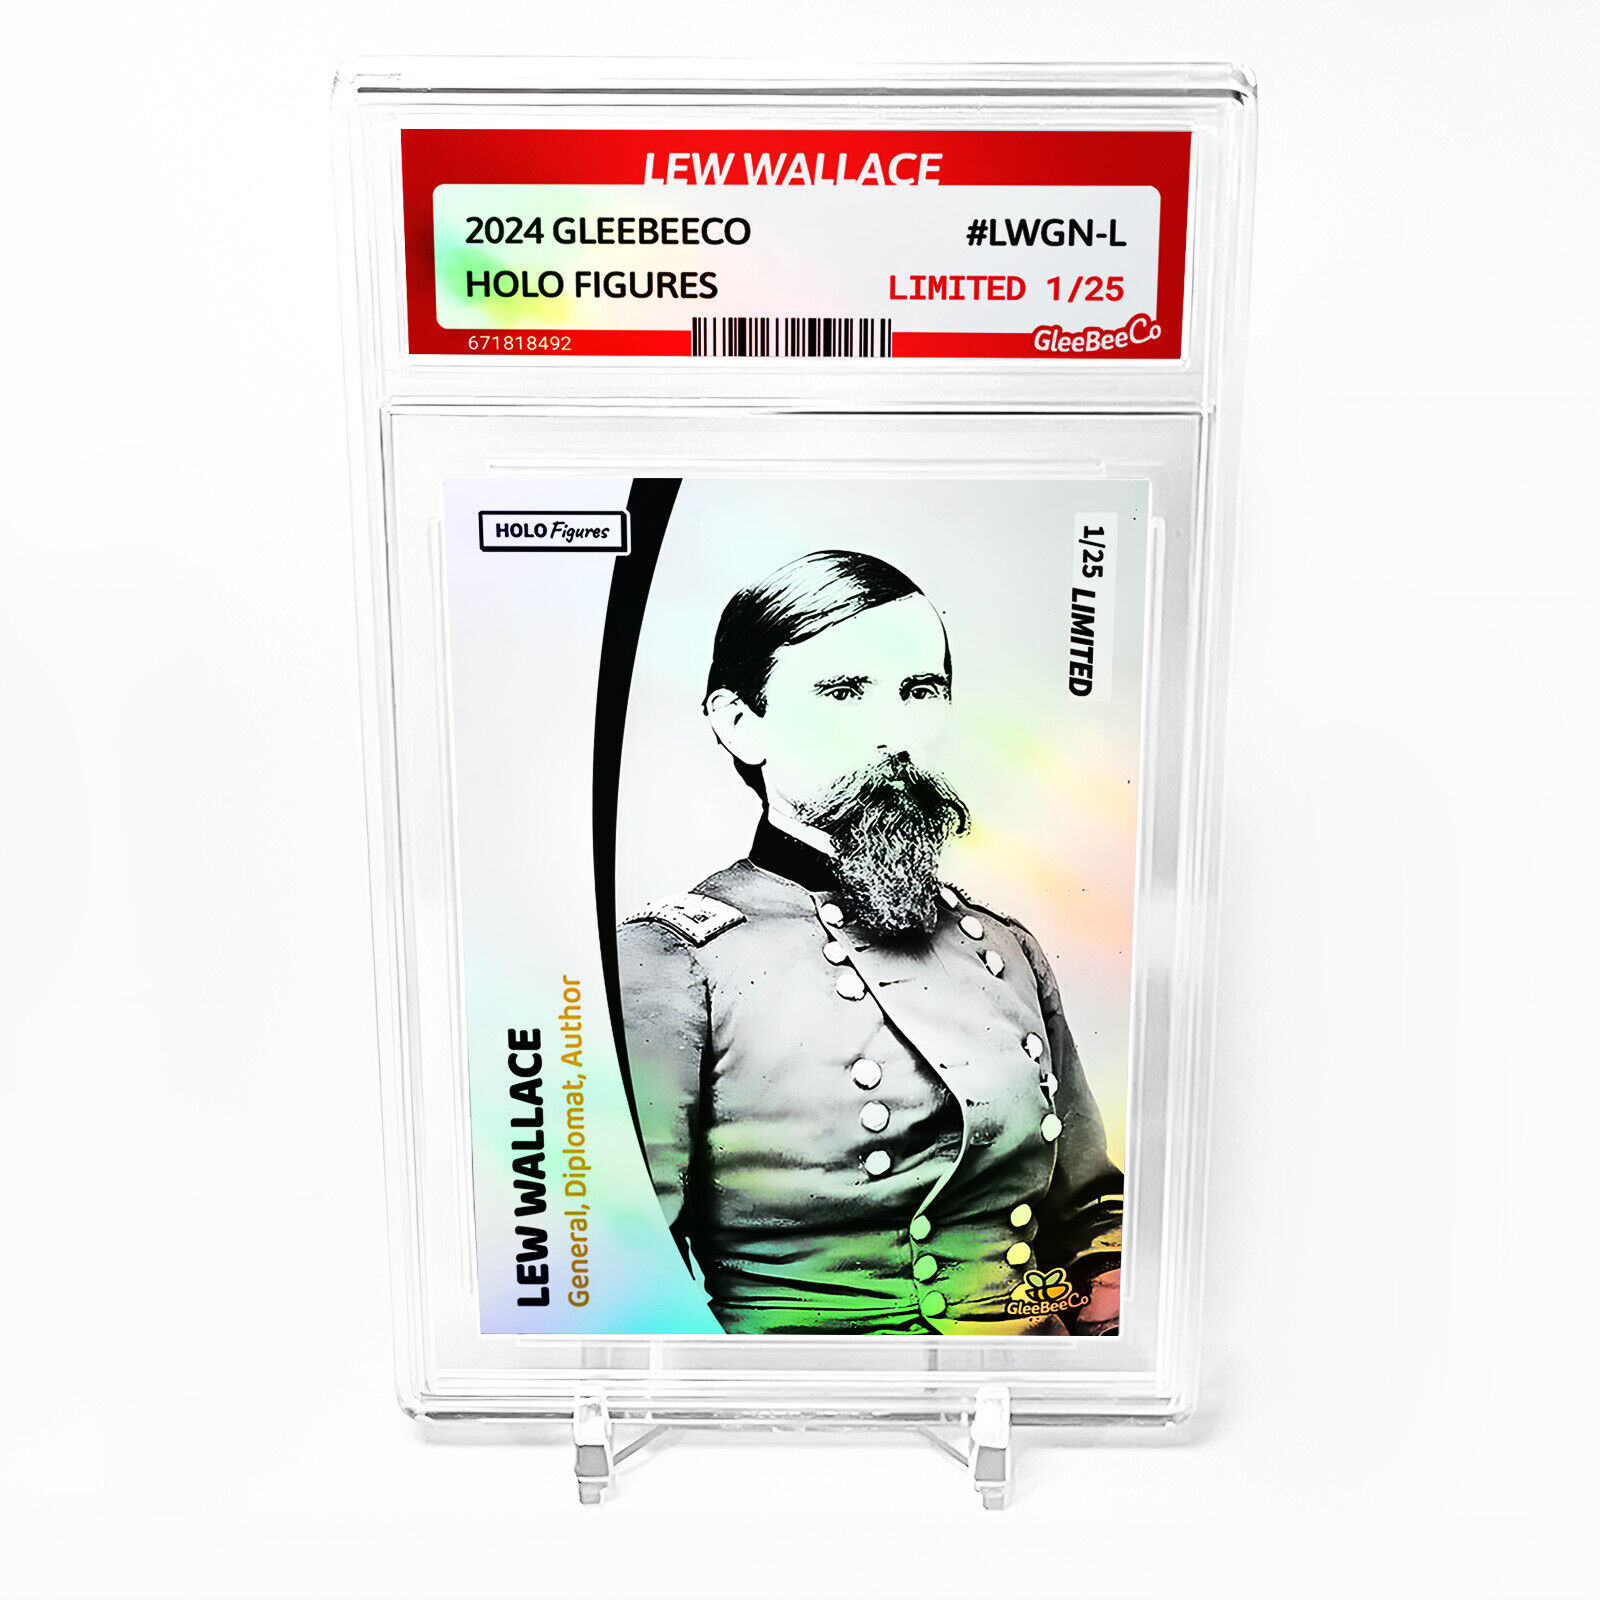 LEW WALLACE 2024 GleeBeeCo Card General, Diplomat, Author Holo #LWGN-L /25